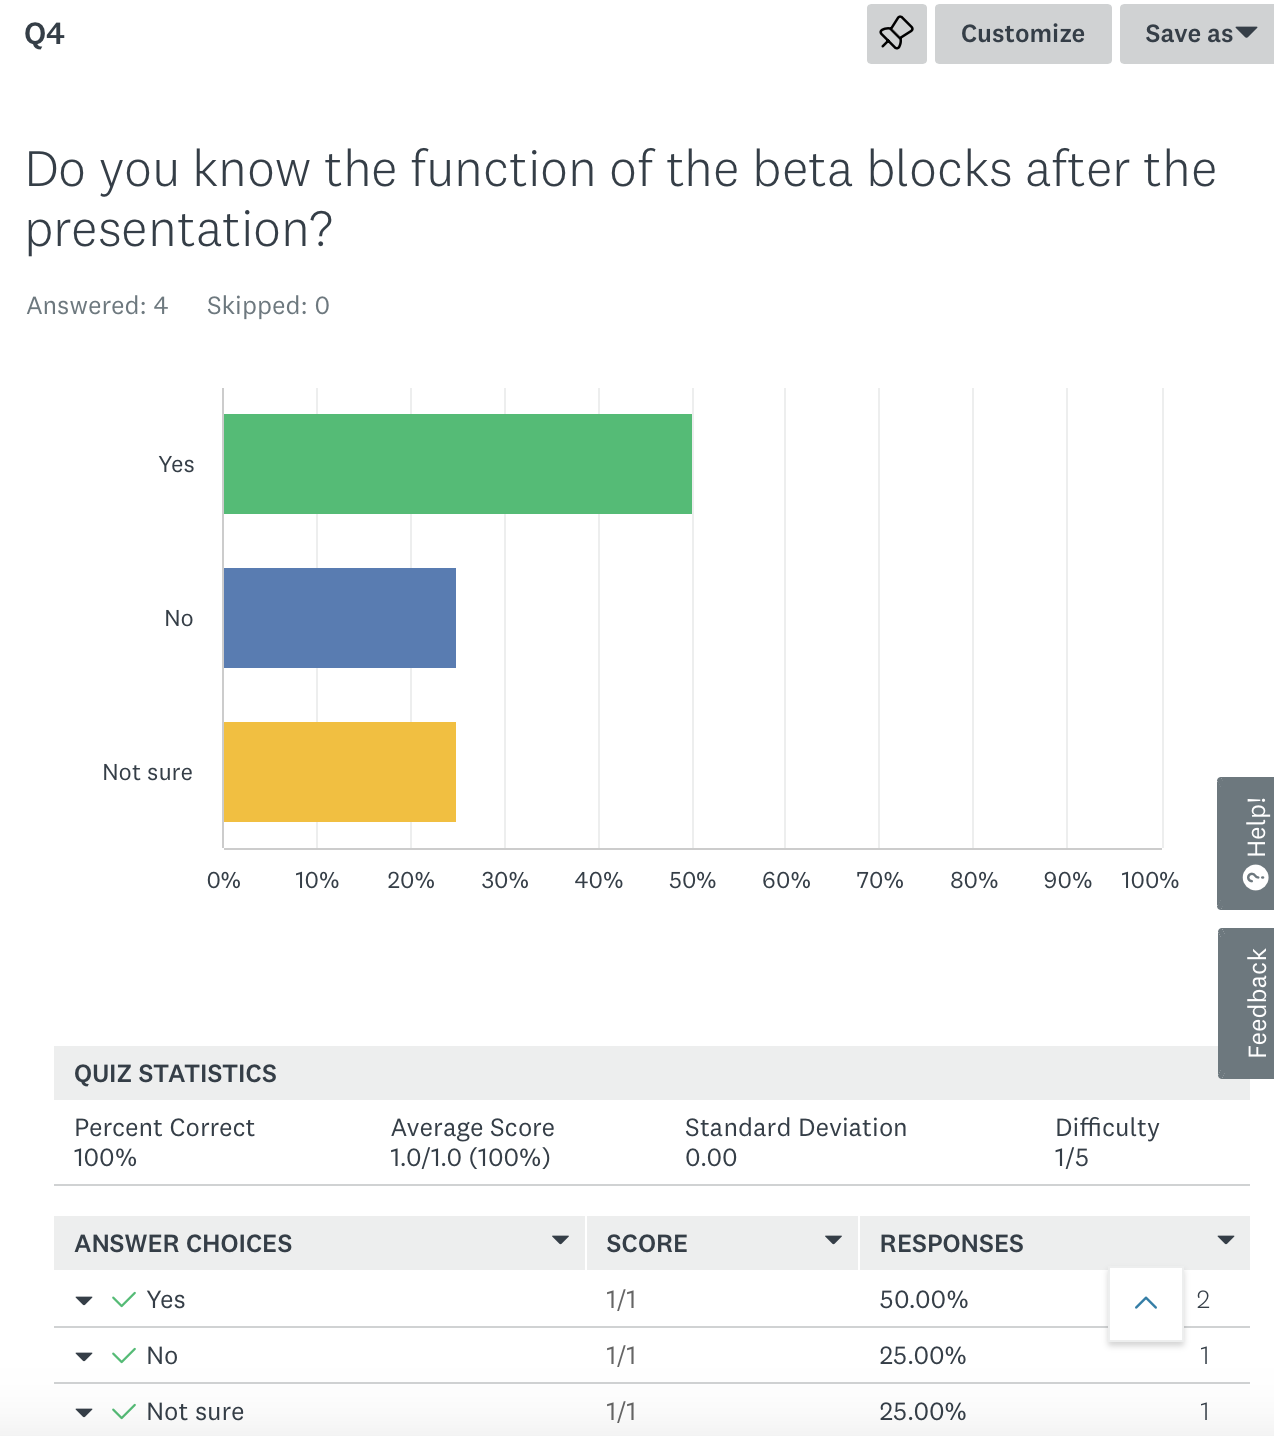 Do you know the function of the beta blocks after the presentation